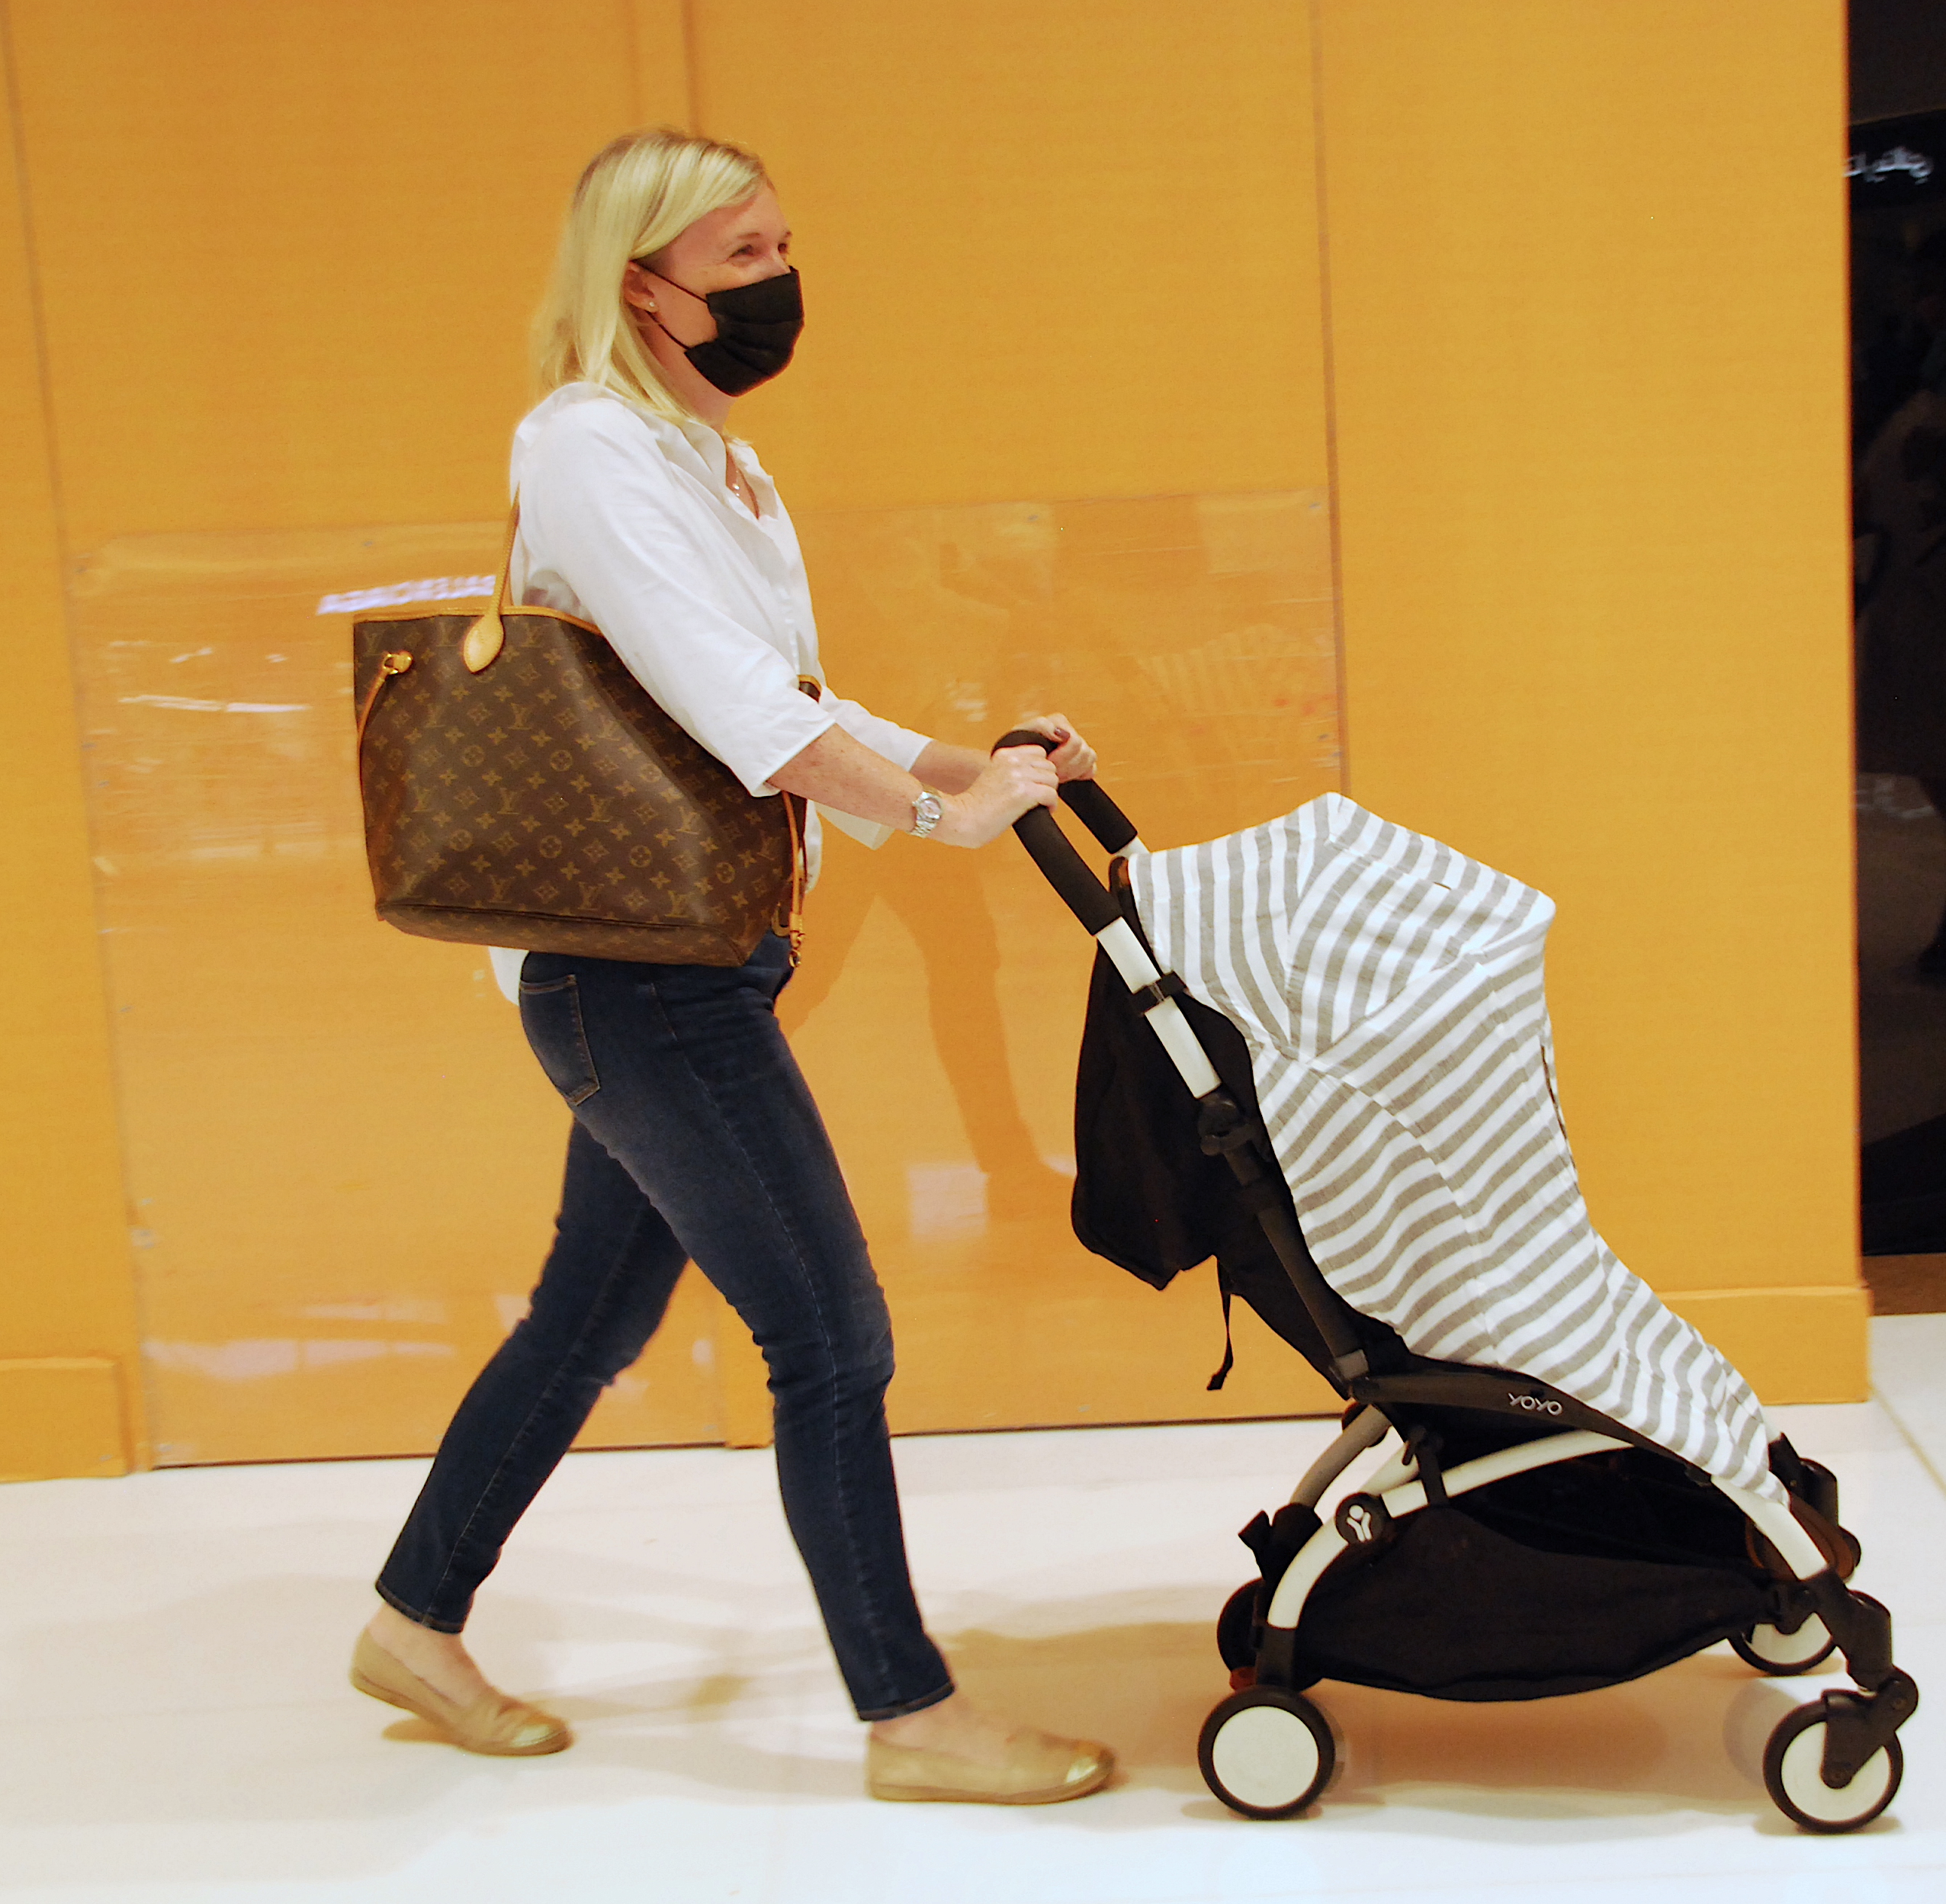 New to the market VirusShield Stroller Cover offers a first of its kind solution for vigilant parents of infants in this post pandemic era.